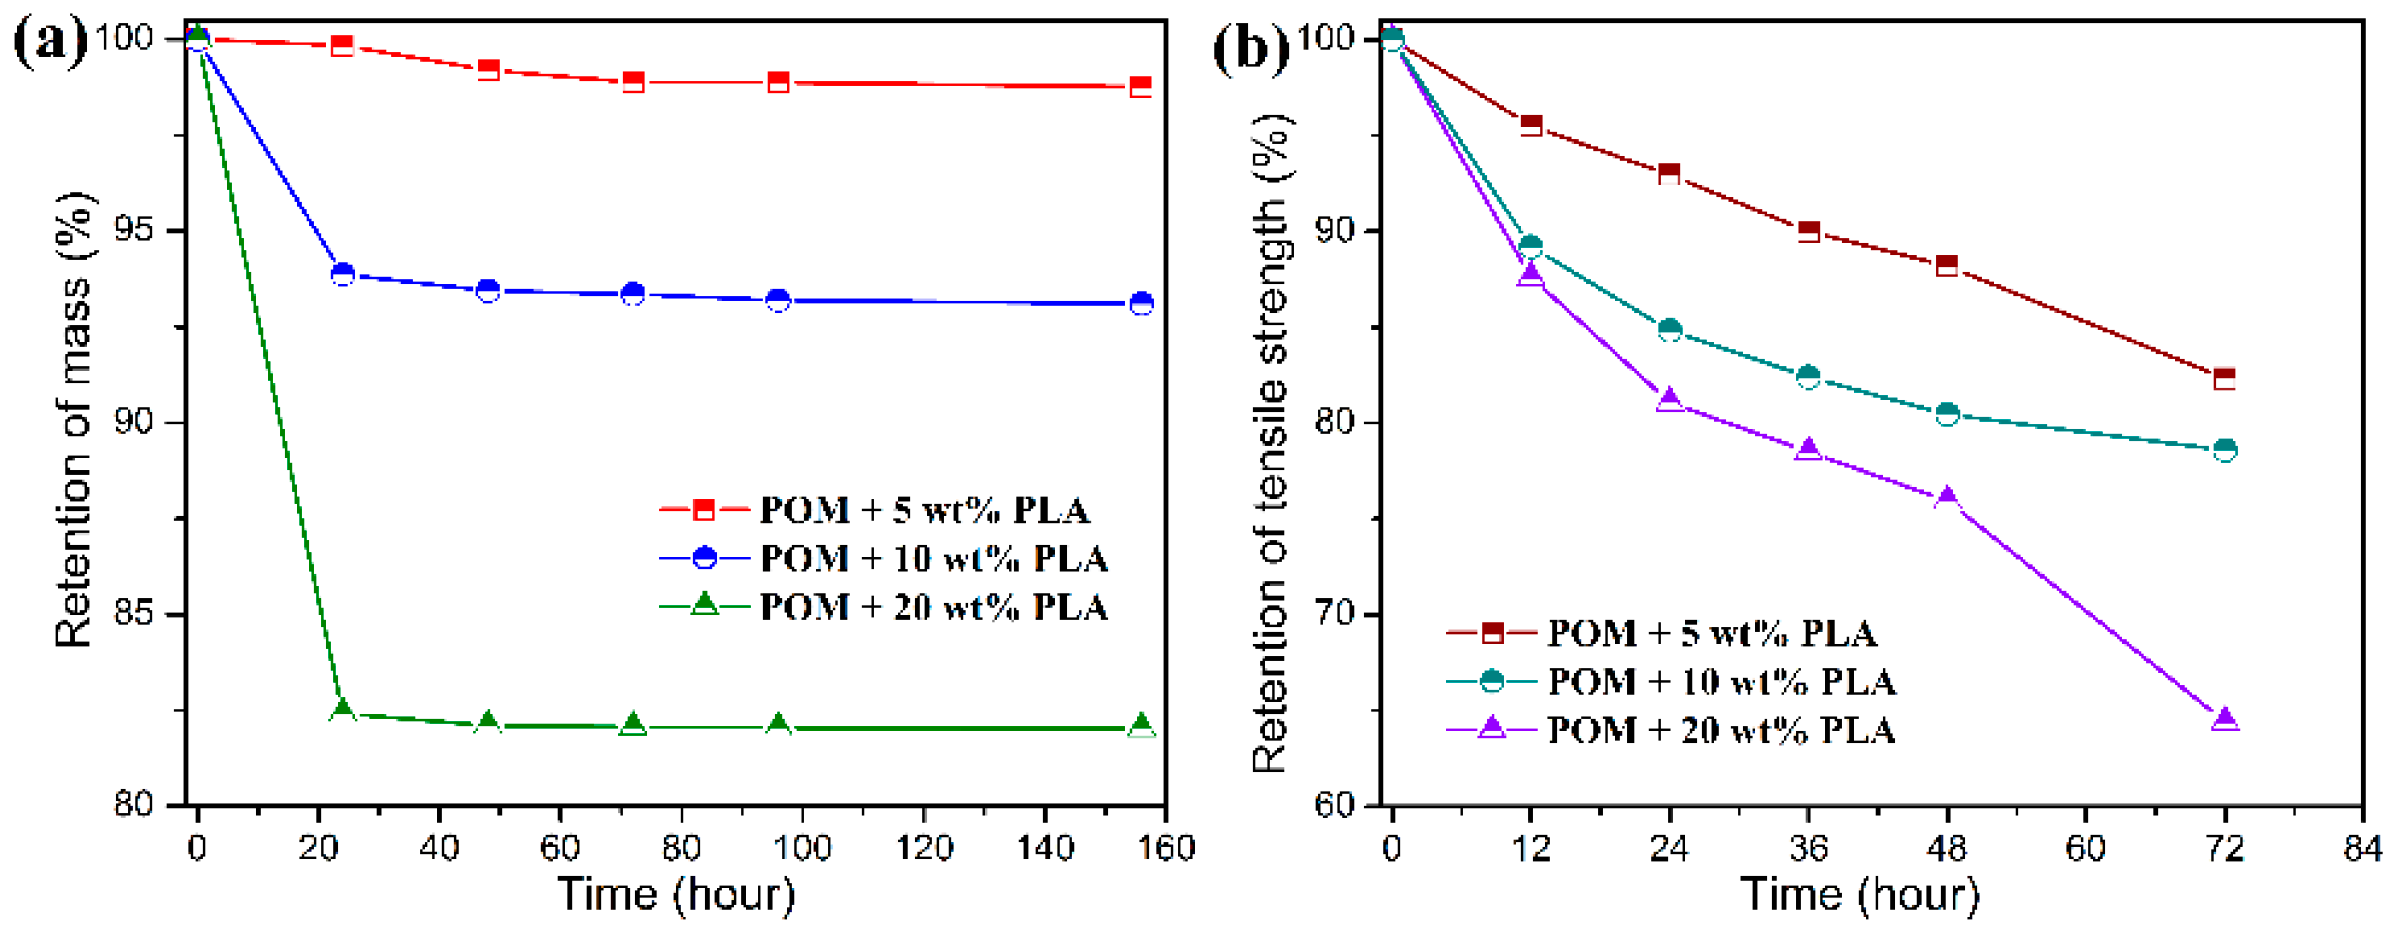 Polymers | Free Full-Text | Crystalline Characteristics, Mechanical  Properties, Thermal Degradation Kinetics and Hydration Behavior of  Biodegradable Fibers Melt-Spun from Polyoxymethylene/Poly(l-lactic acid)  Blends | HTML